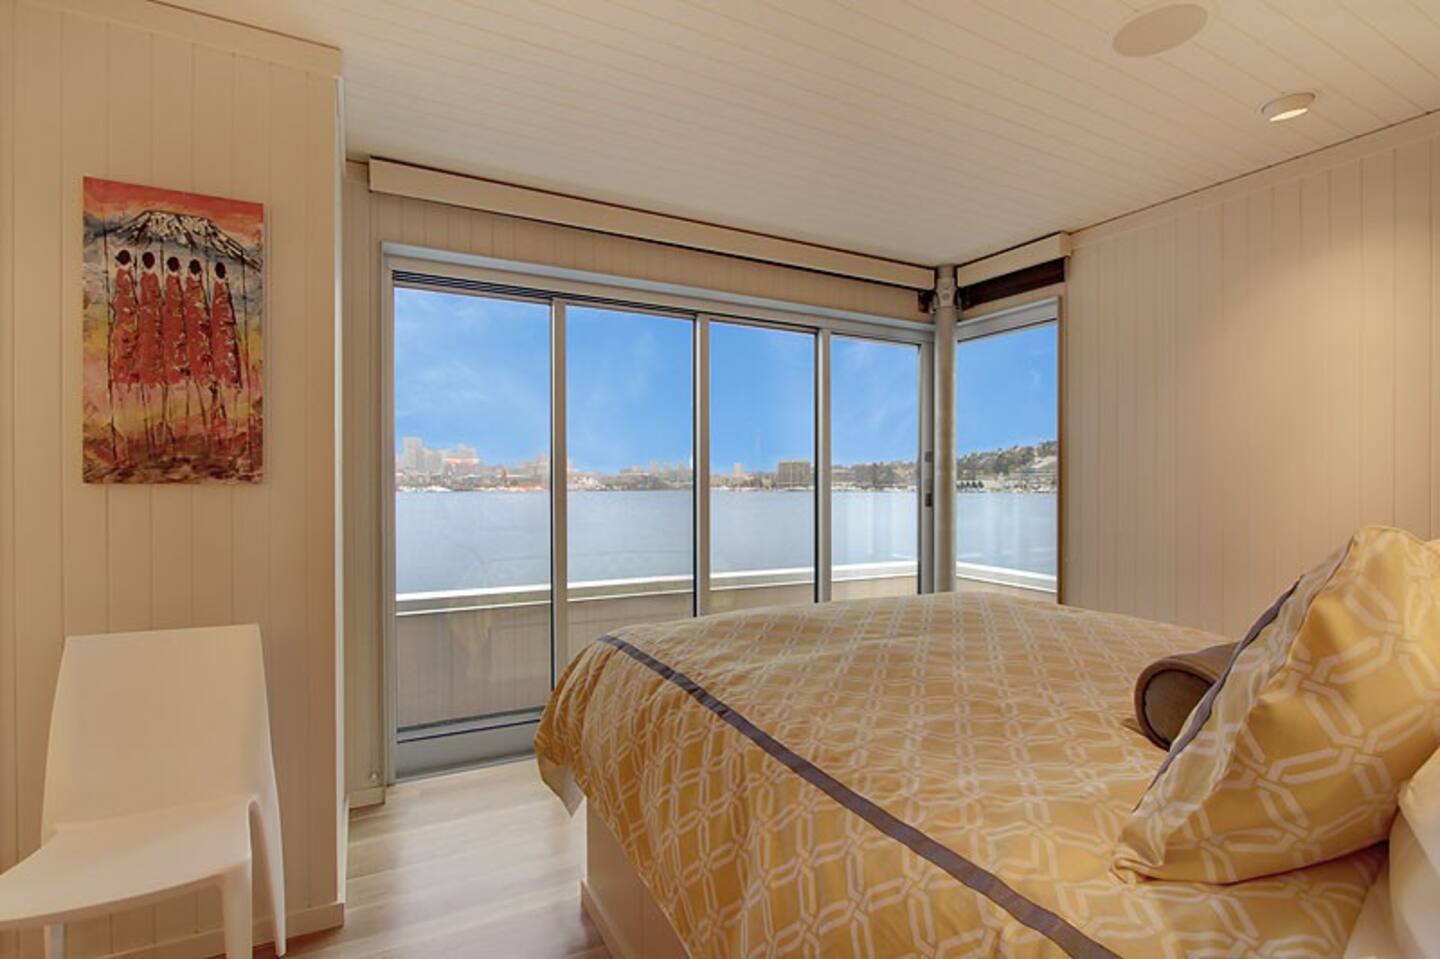 Master bedroom with view of space needle and downtown Seattle.